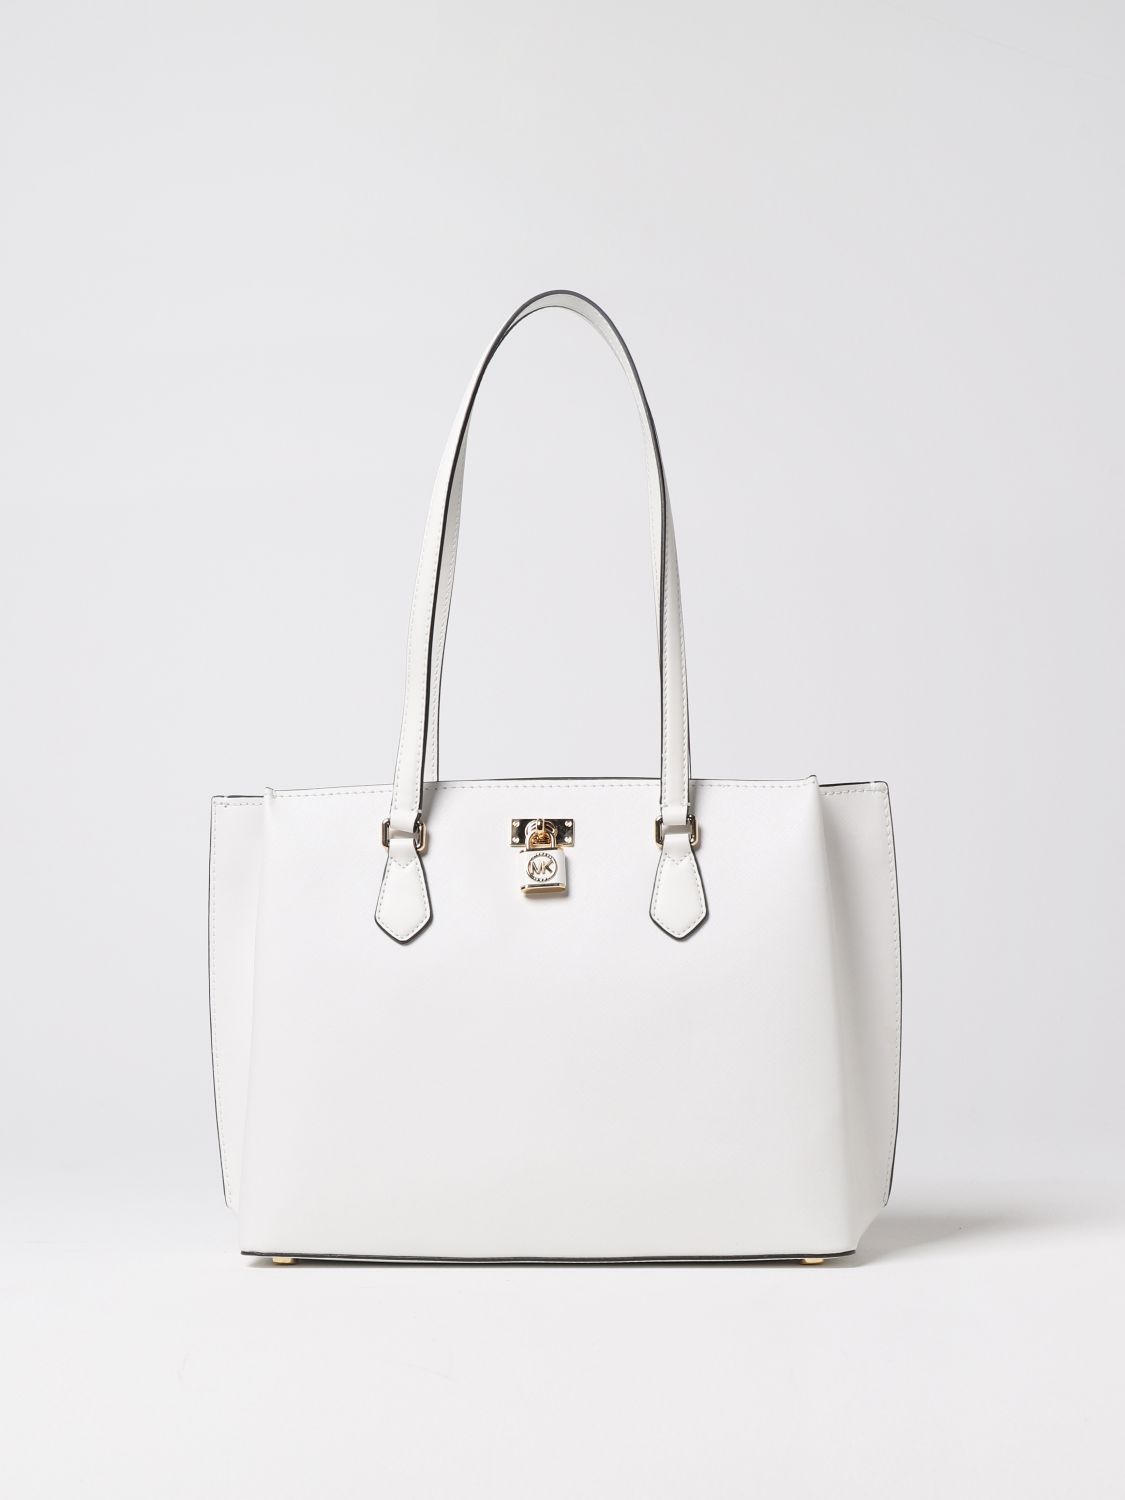 Michael Kors Saffiano Leather Tote Bags for Women - Up to 40% off